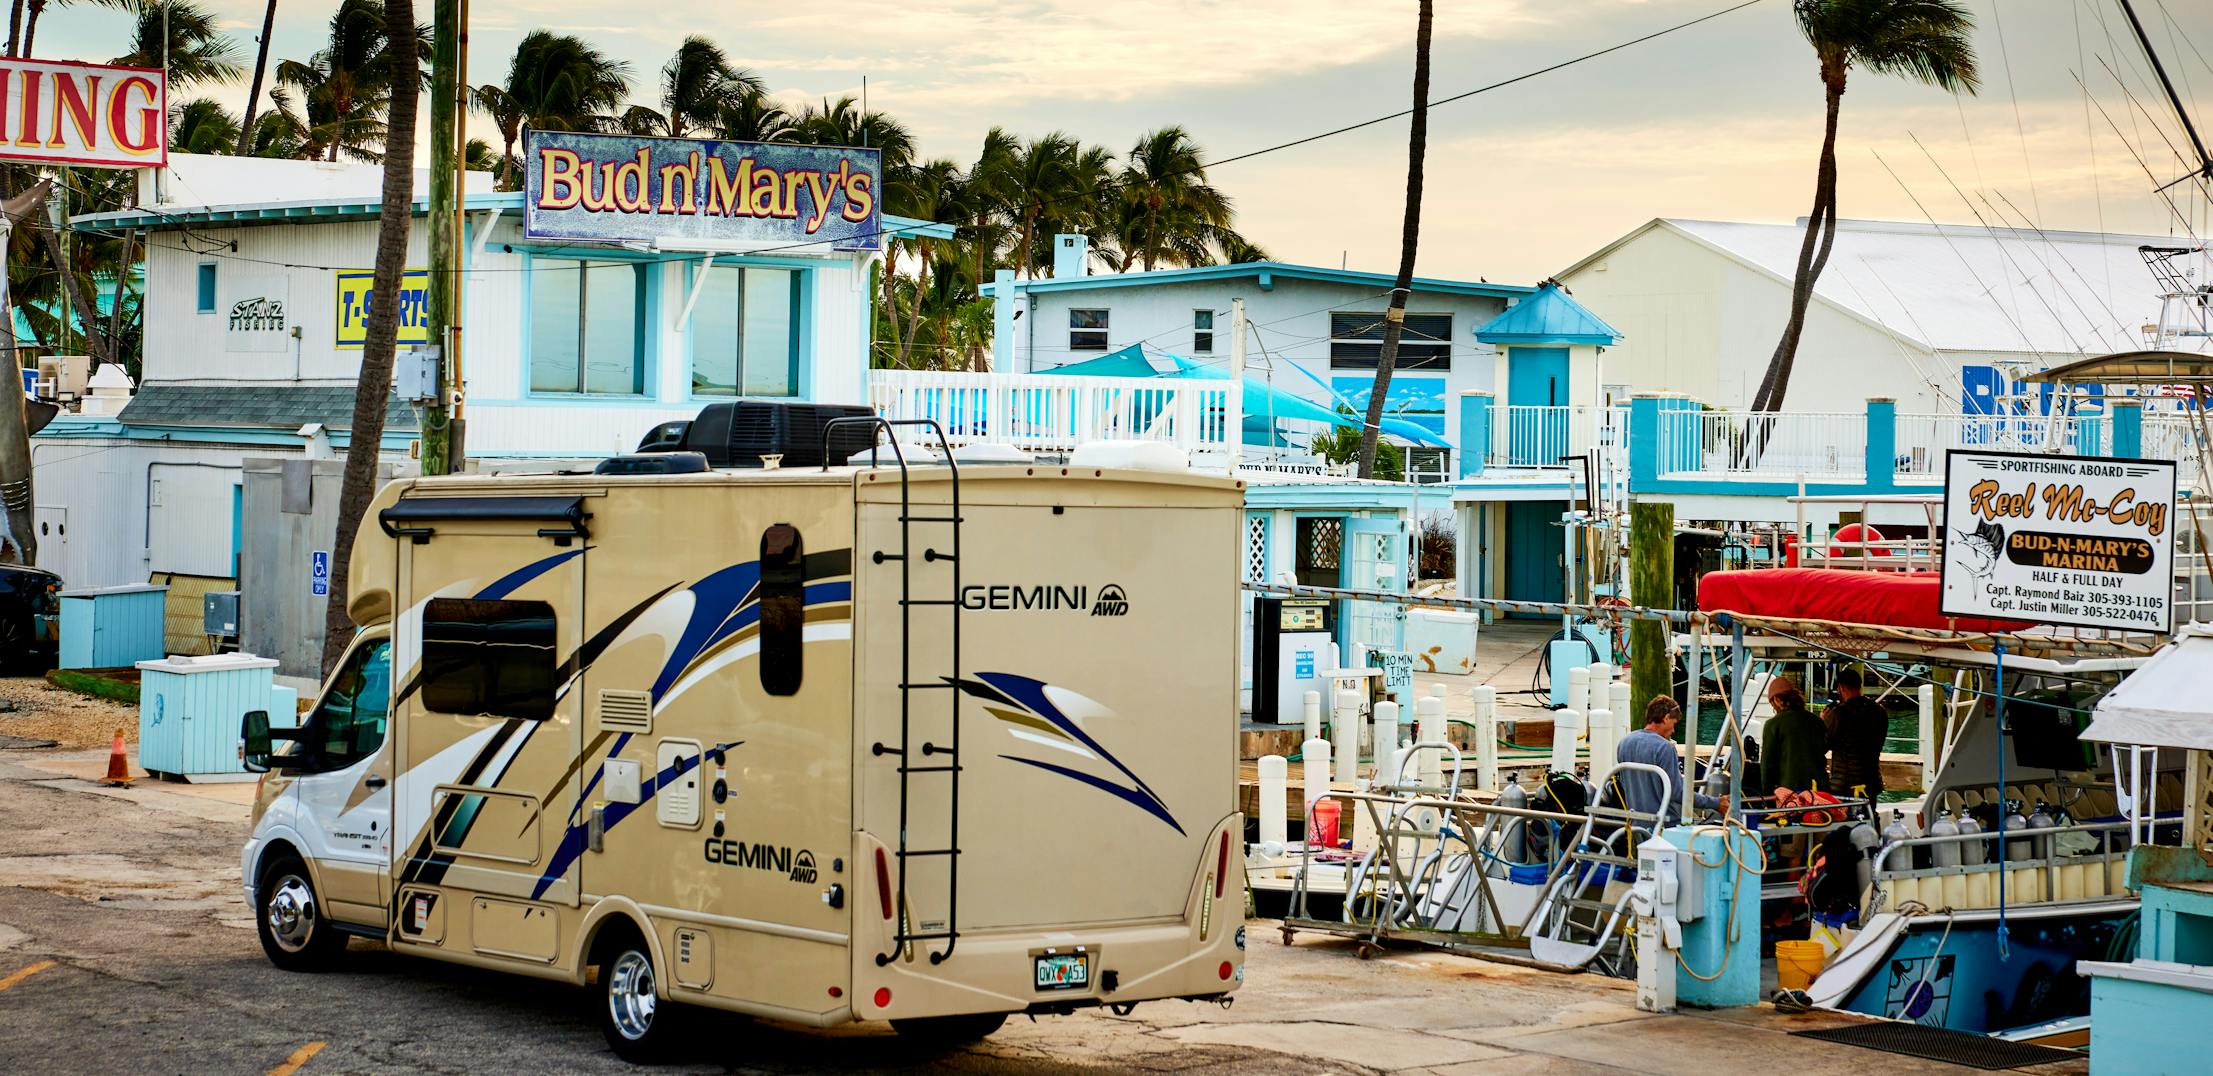 A Thor Motor Coach Gemini is parked at Bud n' Mary's Marina in the Florida Keys.